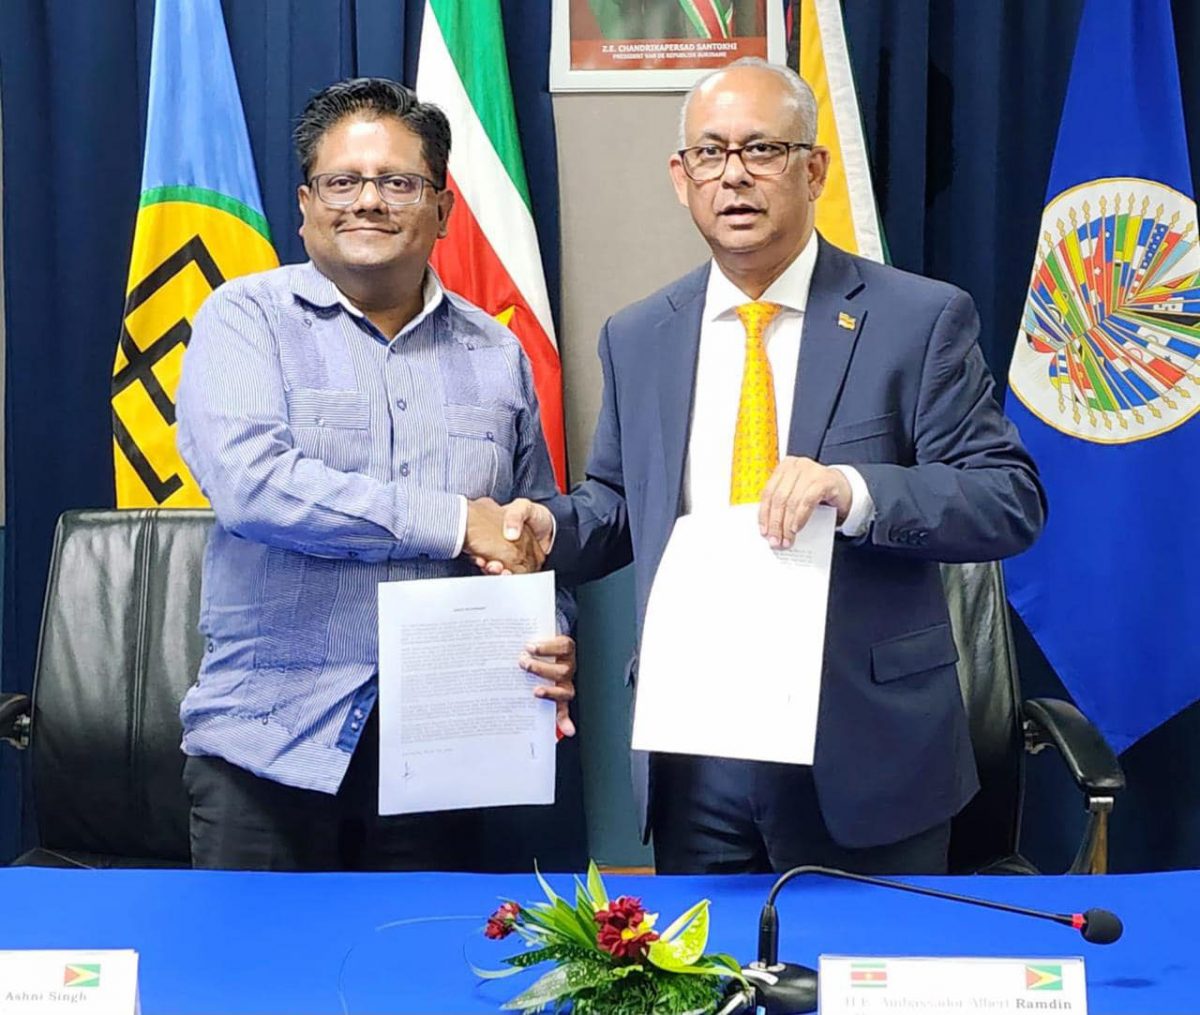 Minister of Finance Dr Ashni Singh (left) and Suriname’s Minister of Foreign Affairs, International Business and International Cooperation, Albert Ramdin yesterday (Ministry of Finance photo)